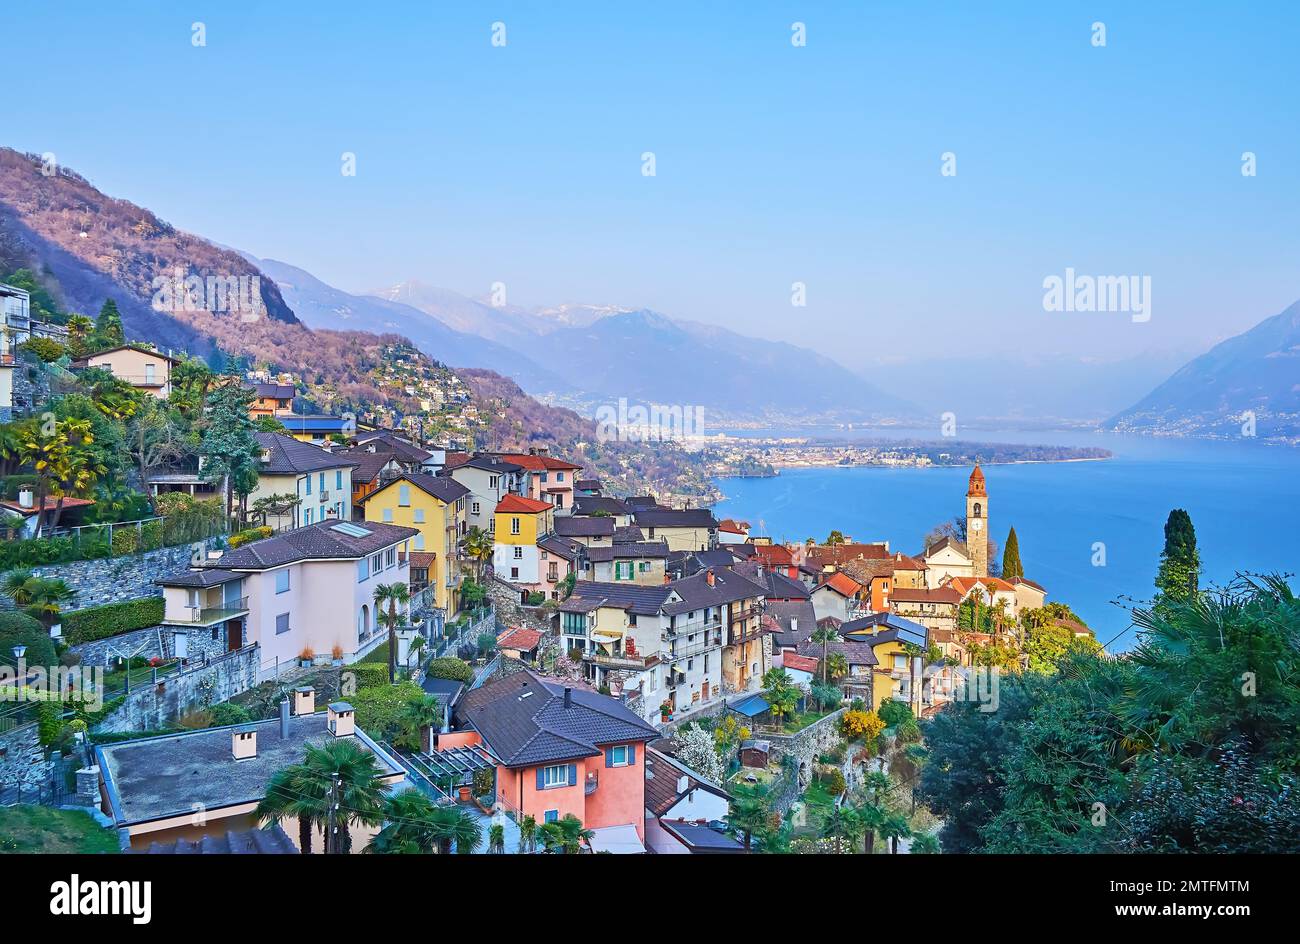 The beautiful Alpine landscape with houses of Ronco sopra Ascona, blue Lake Maggiore and hazy mountains in light of evening sun, Switzerland Stock Photo